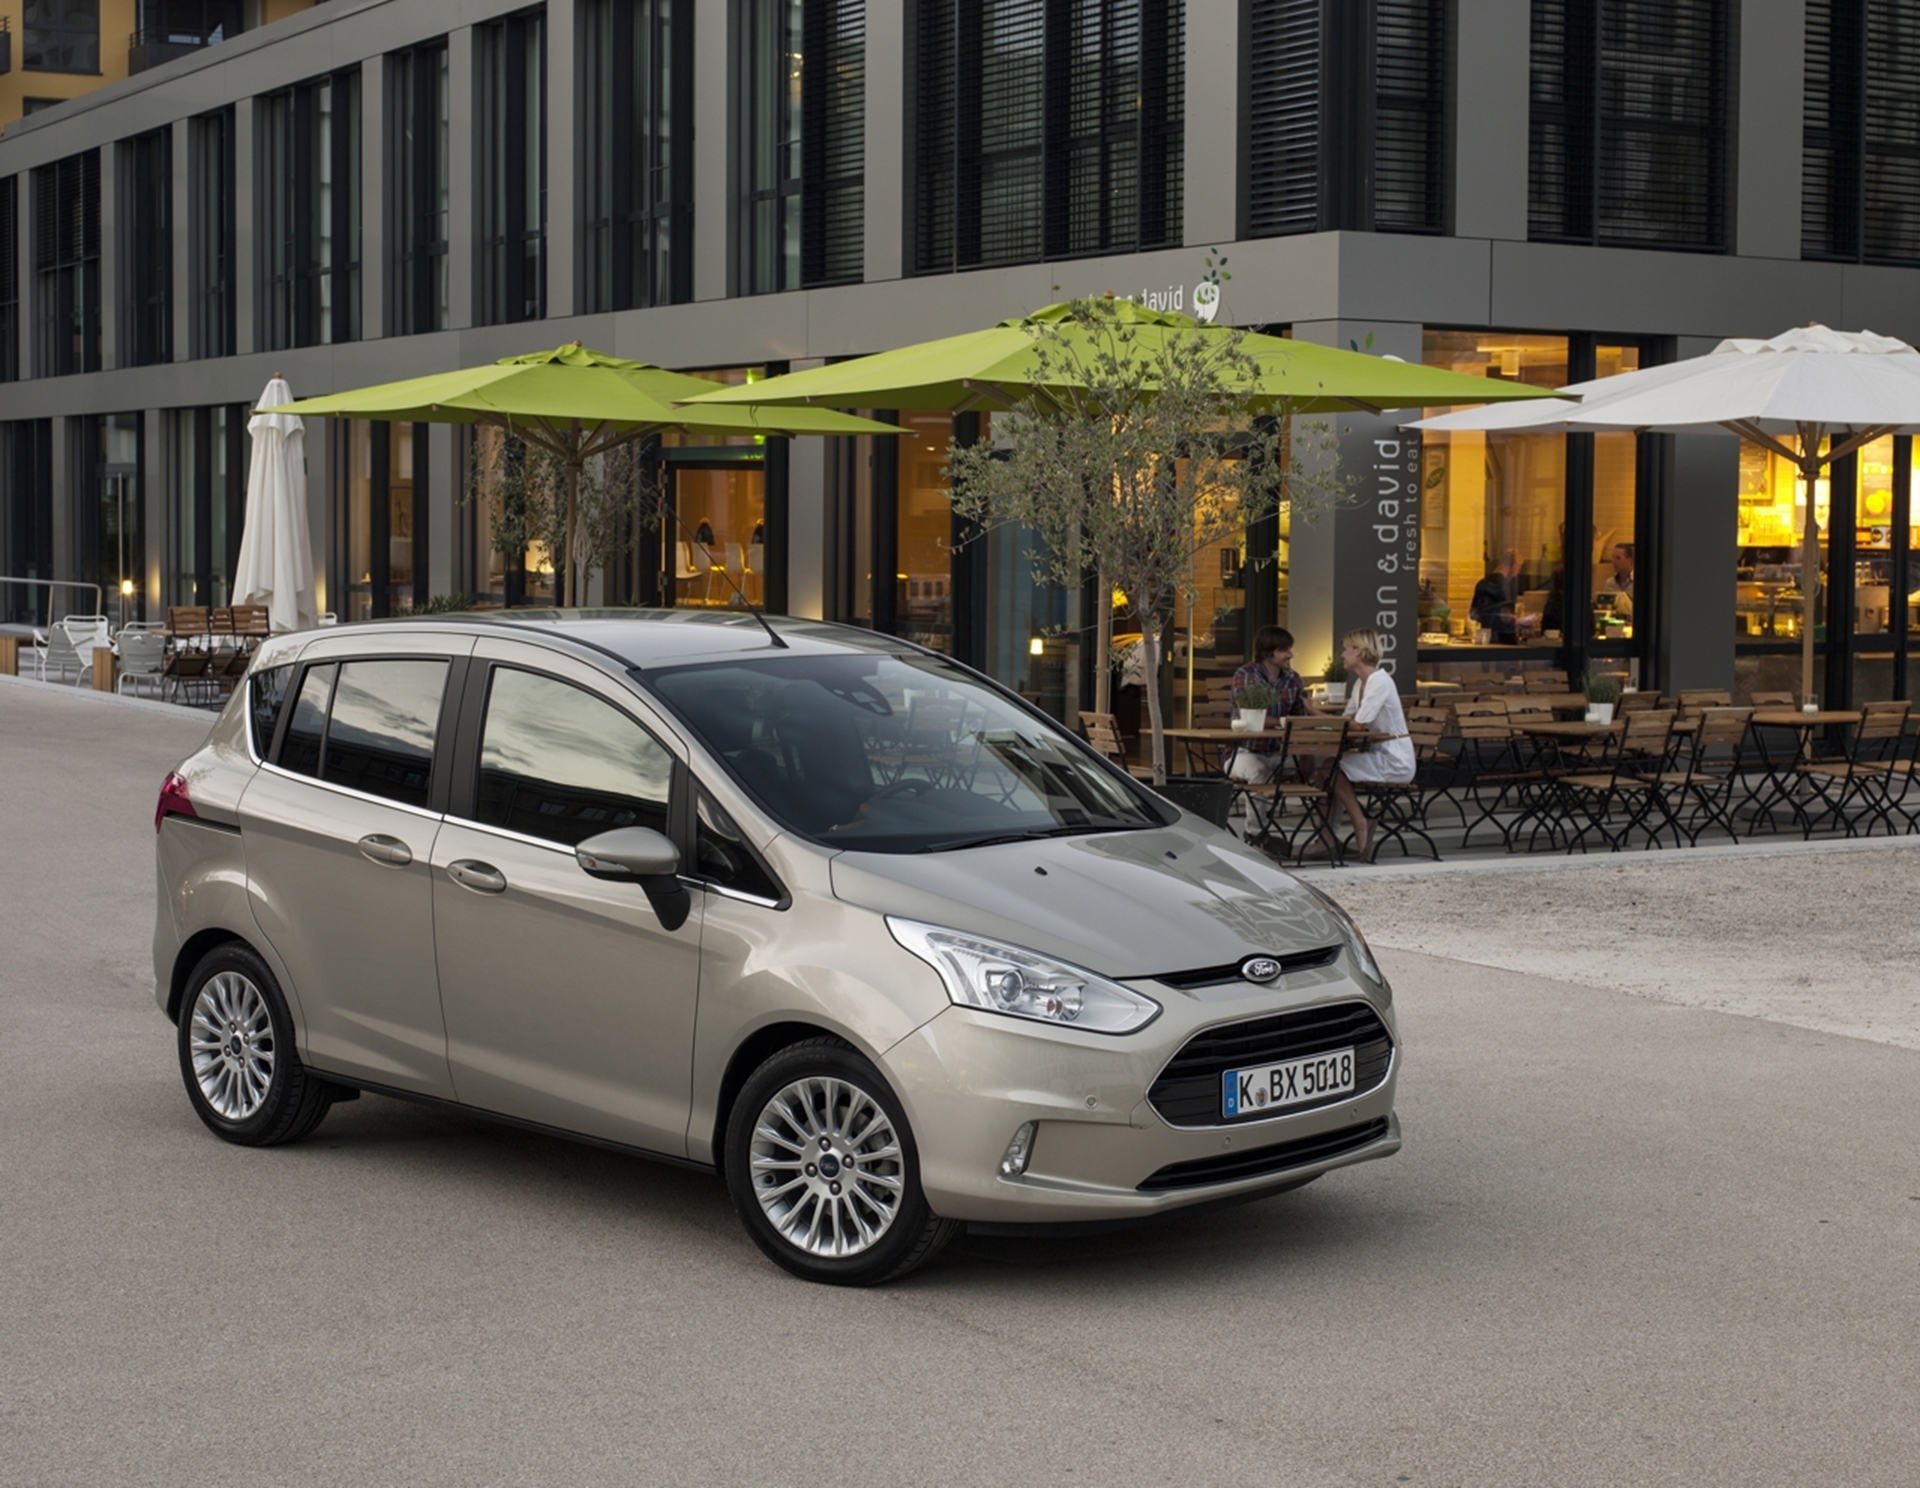 New Ford B-MAX High-Strength-Steels, Ingenious Design and Technology Combine to Help Protect Occupants